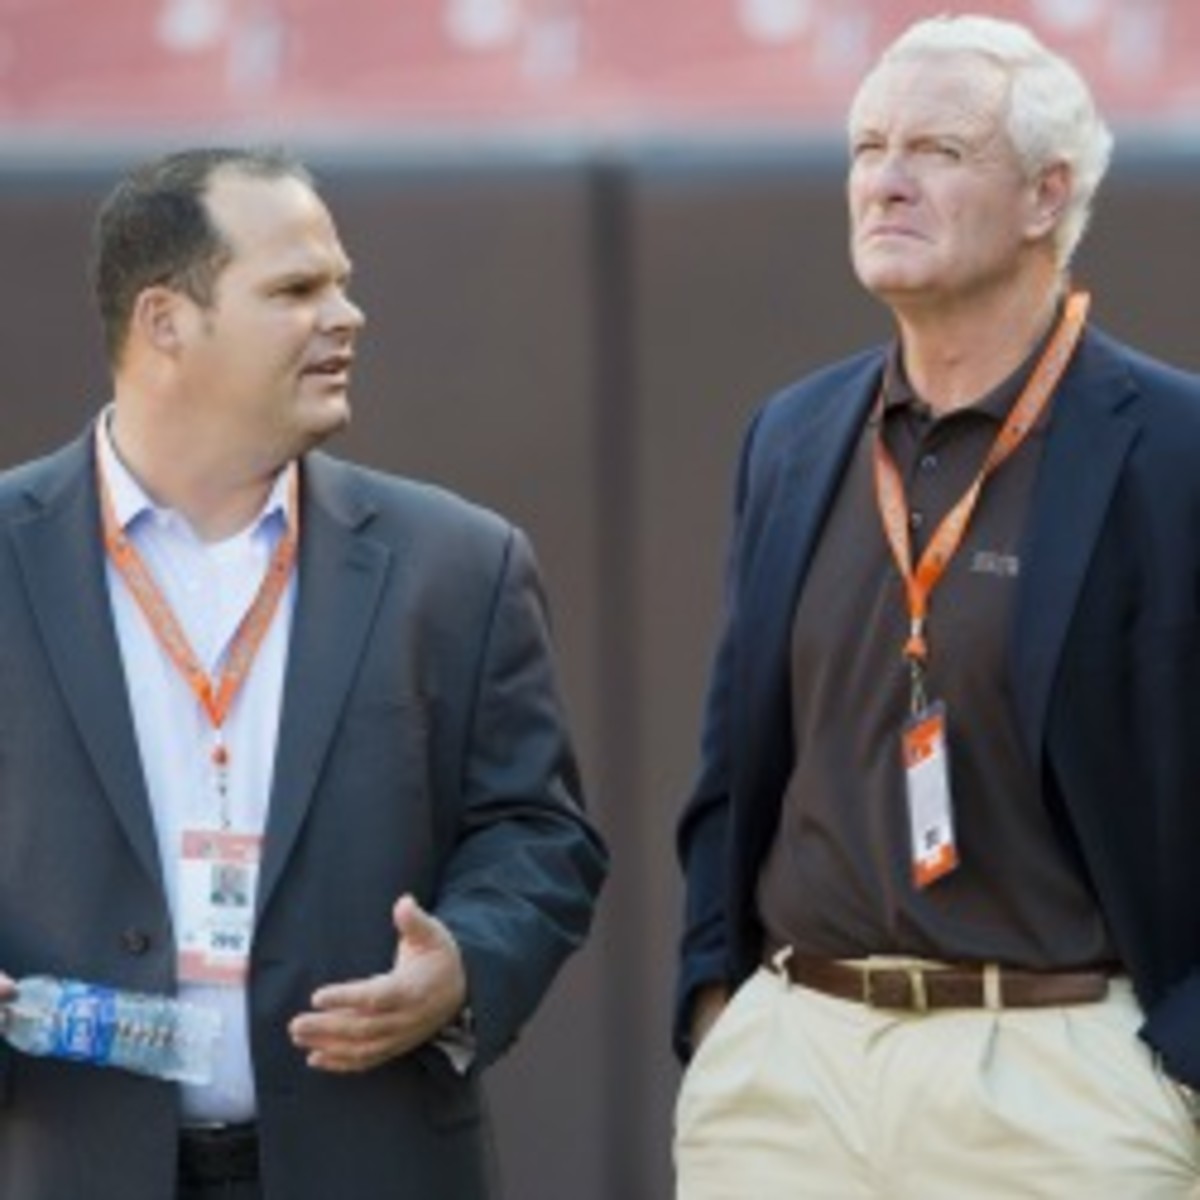 Browns owner Jimmy Haslem (right) is expected to make a statement to media.   (Jason Miller/Getty Images)